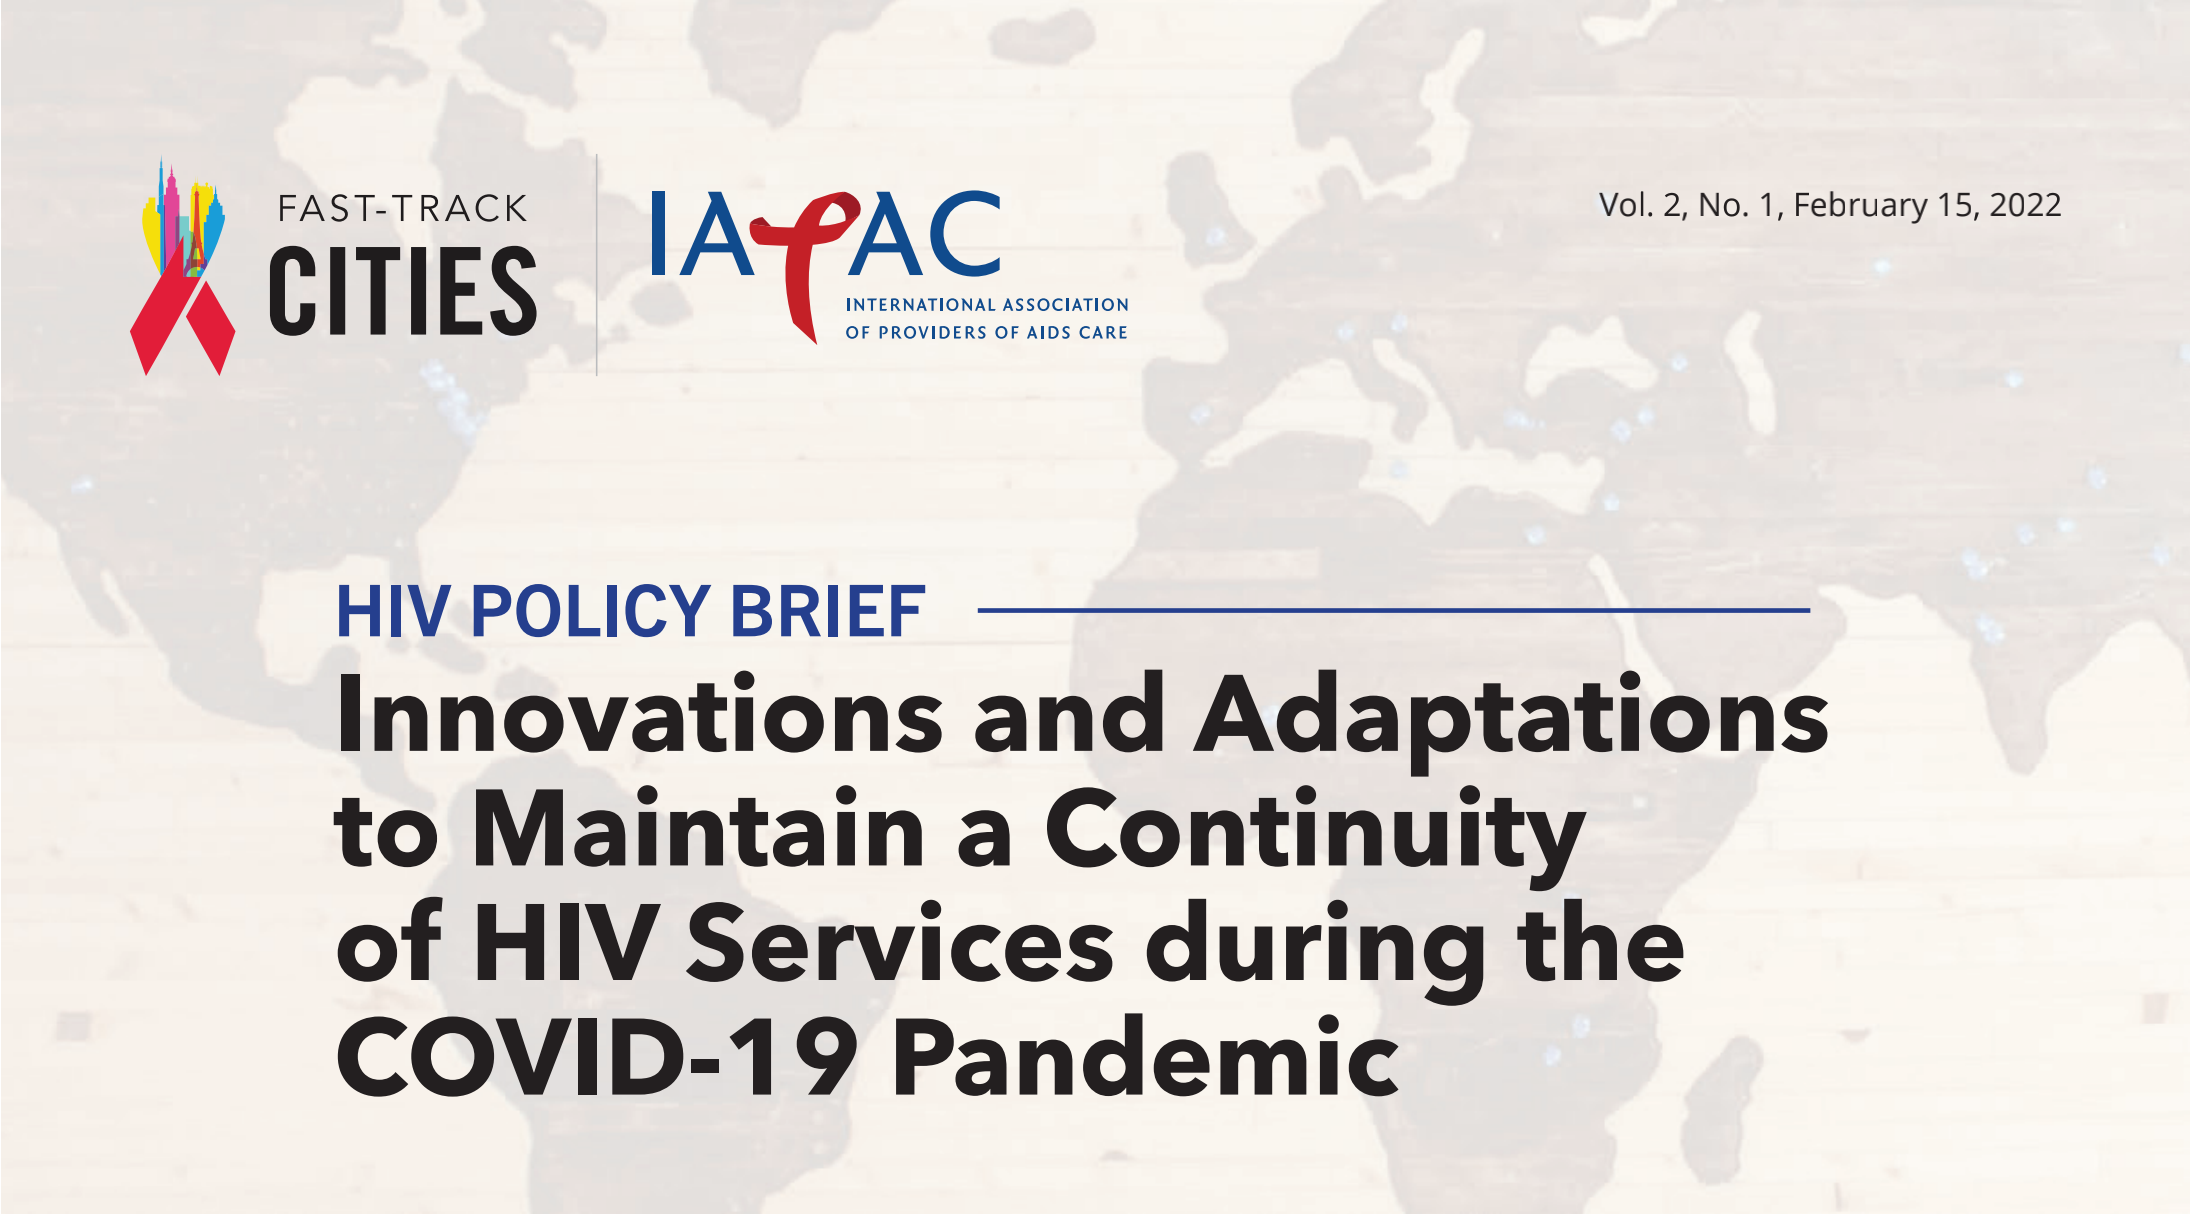 https://www.iapac.org/files/2022/02/HIV_Policy_Brief_COVID.png